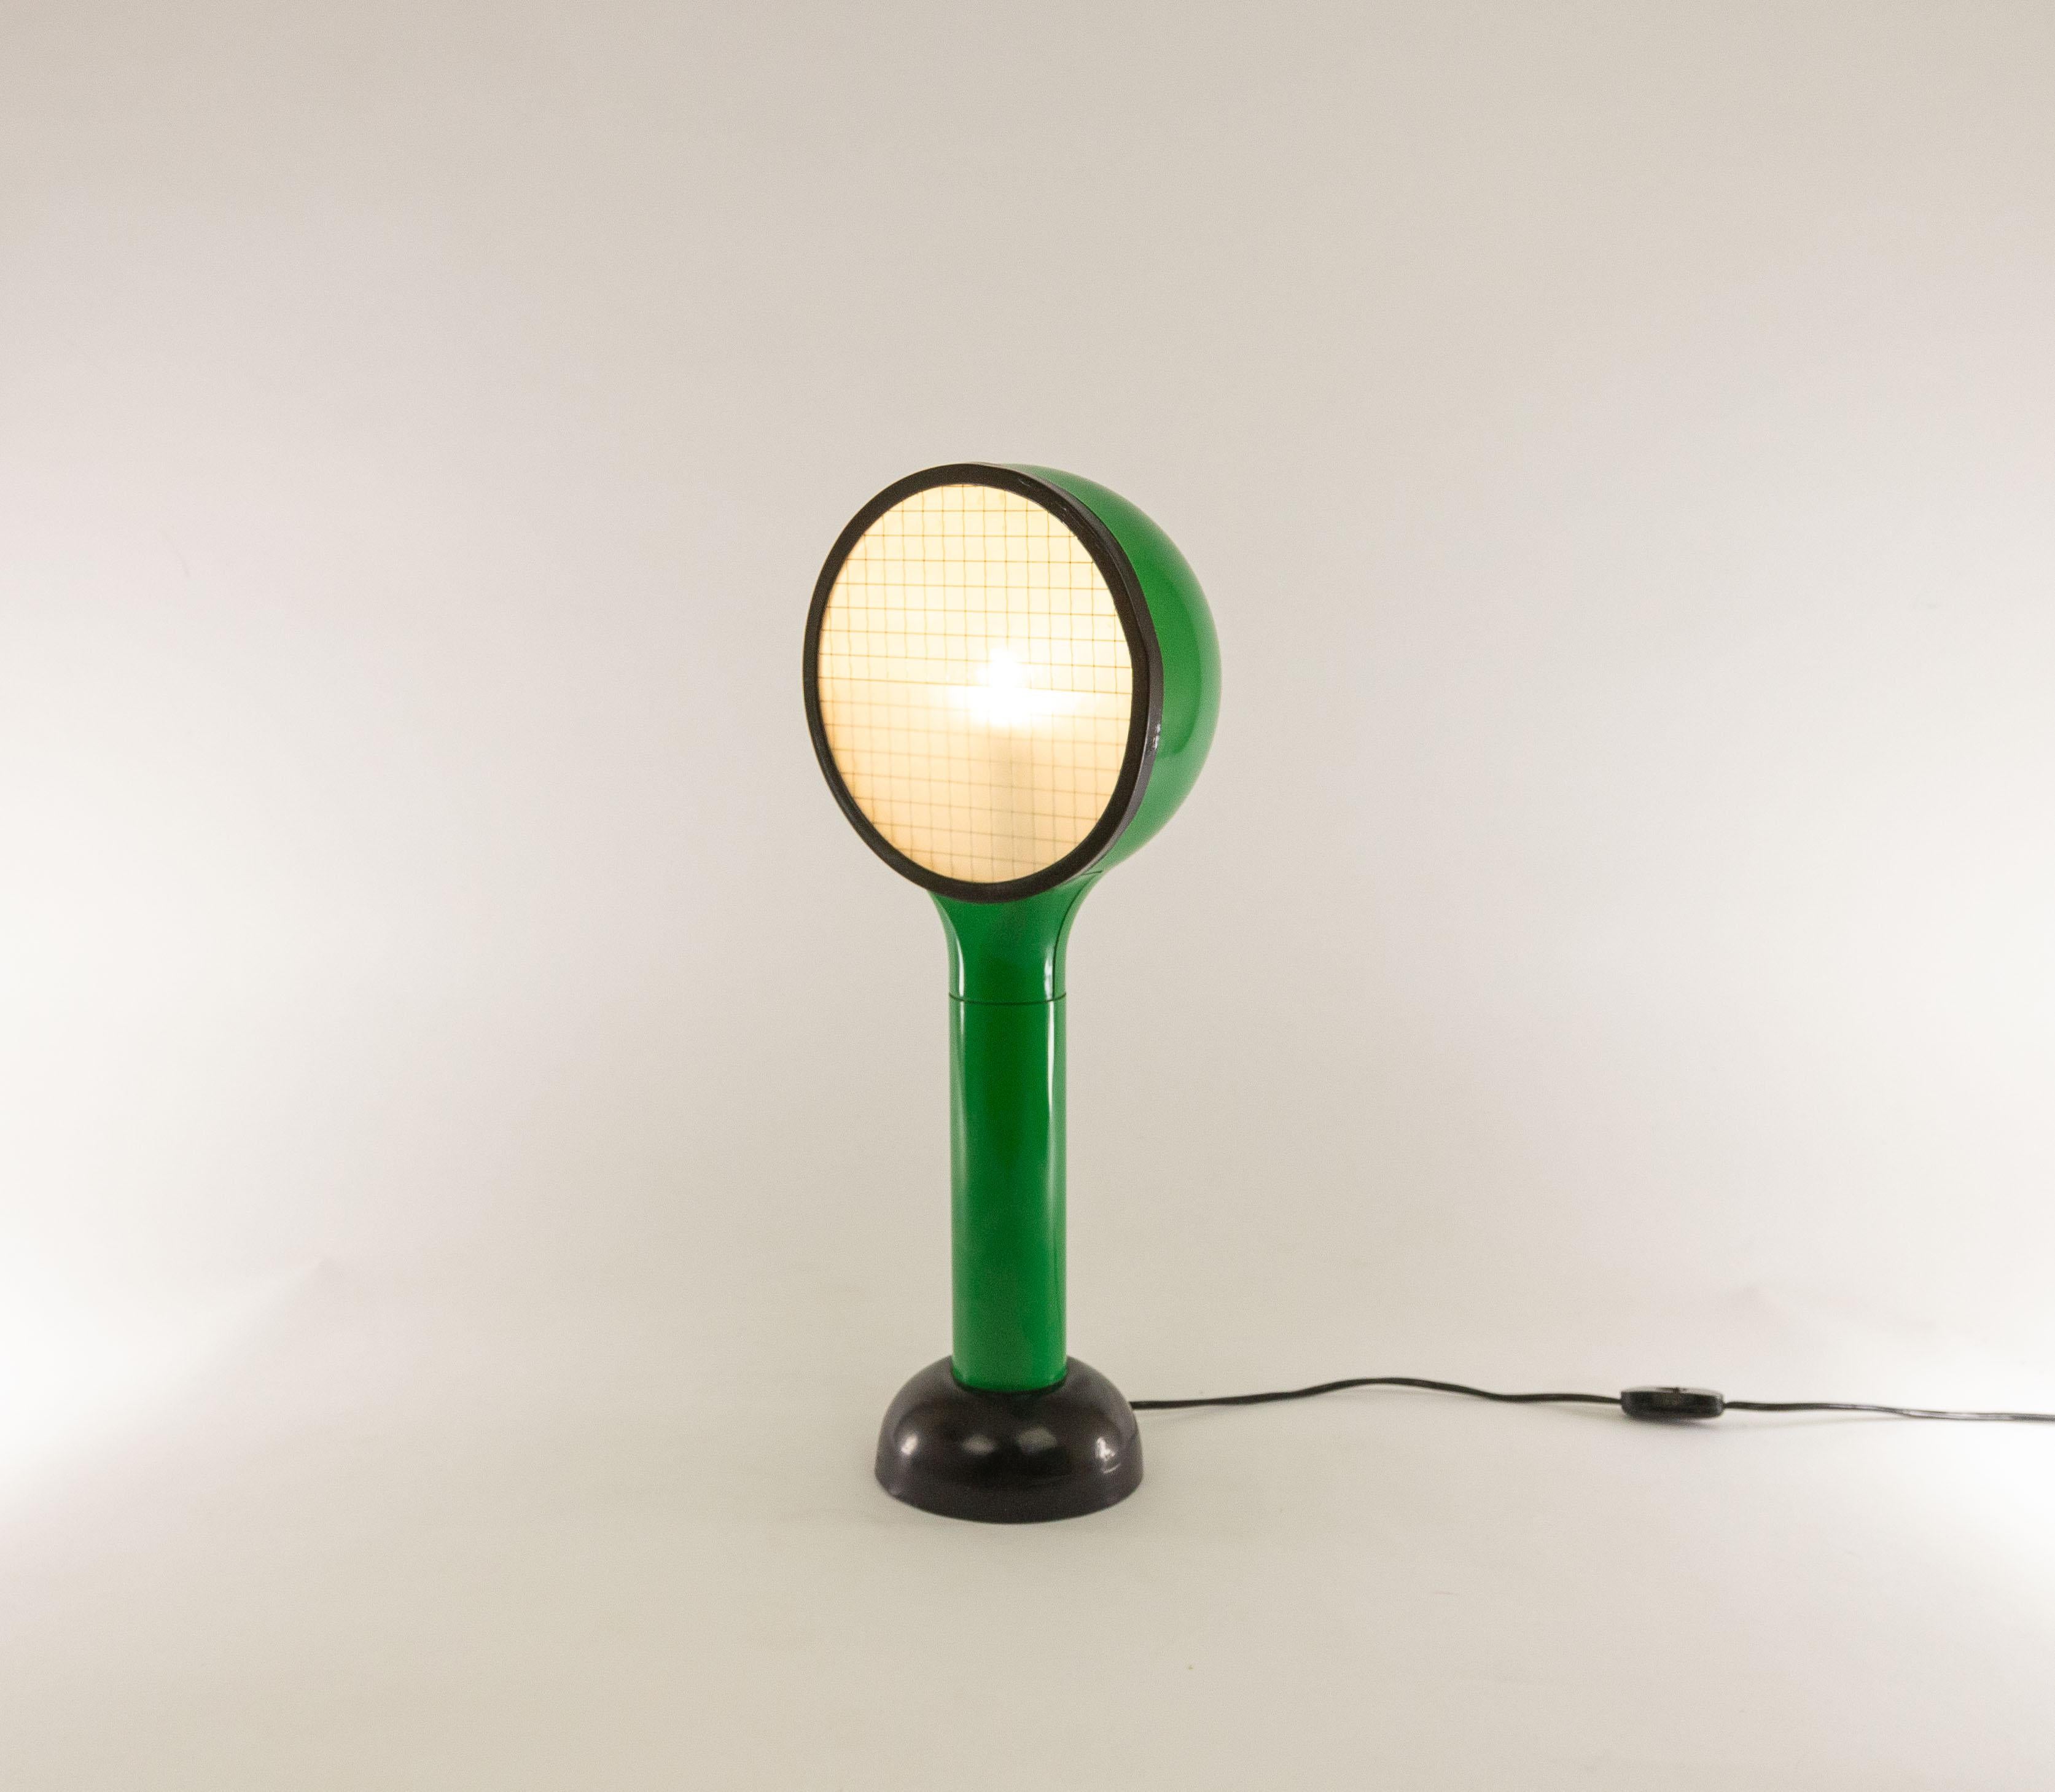 Table lamp drive designed by Adalberto Dal Lago and Adam Thiani in 1974. It was manufactured by Francesconi and features an original label on its underside.

This model is part of a series of wall and table lamps. All of them made from plastic,